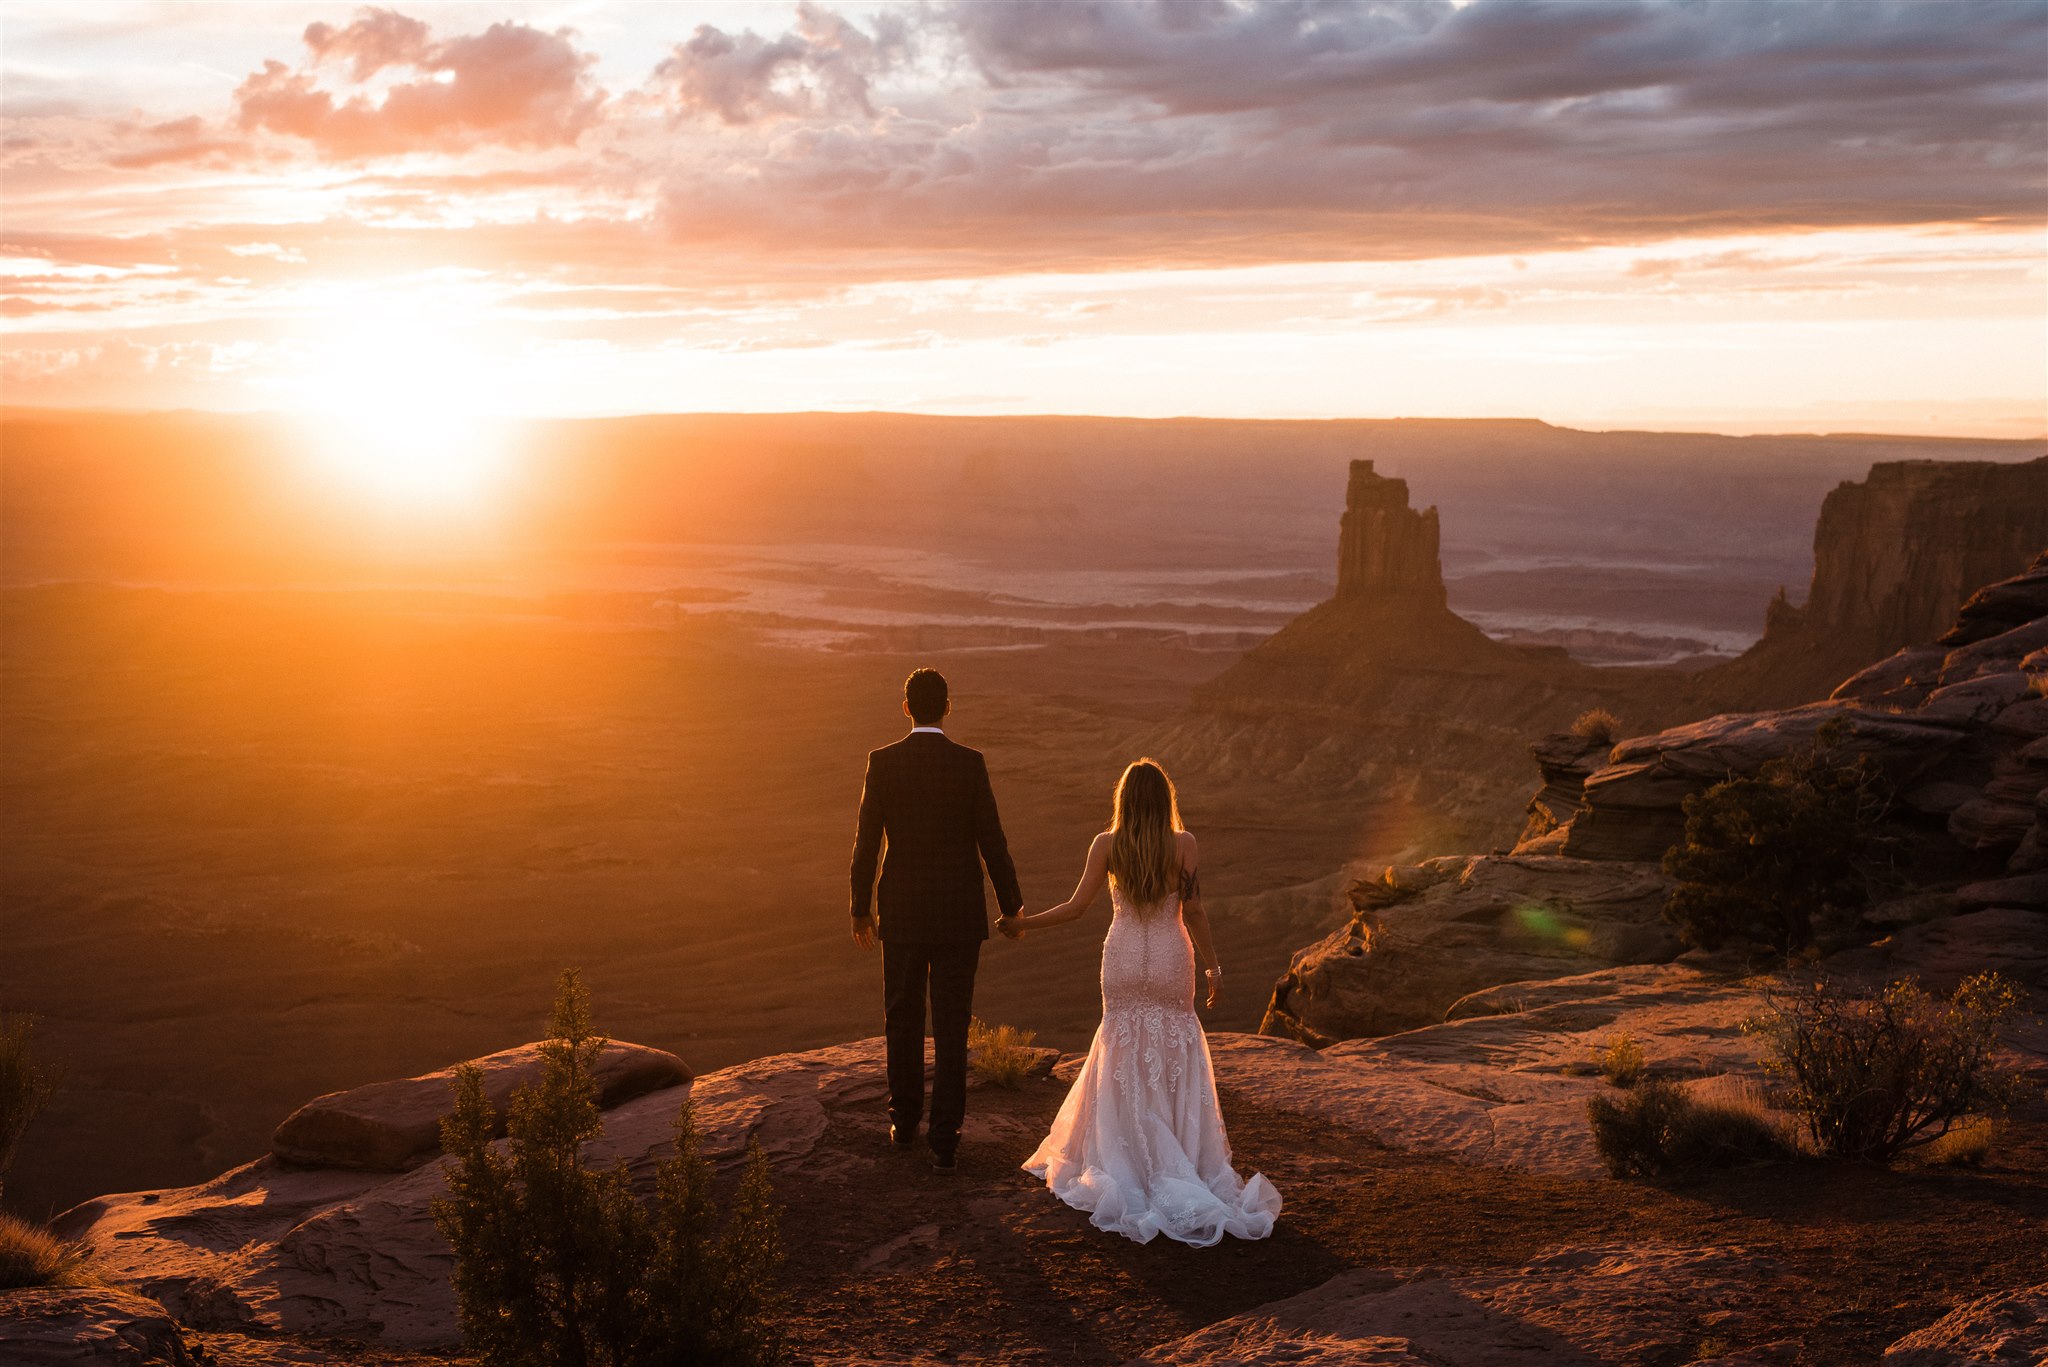 Desert adventure elopement. Image: The Foxes Photography